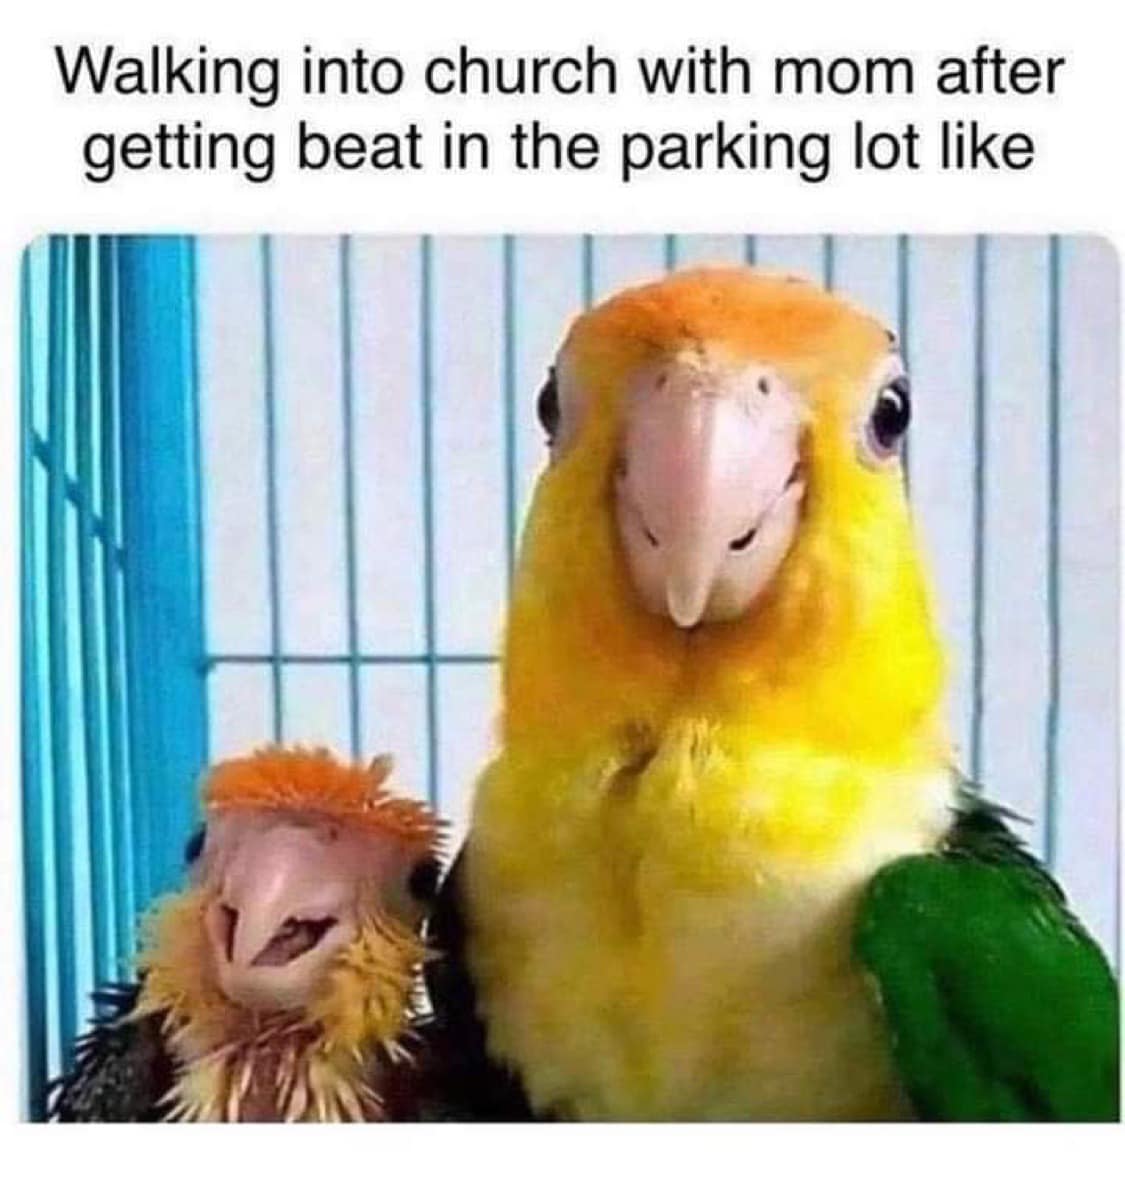 Childhood Memes - bouncer is your friend ok - Walking into church with mom after getting beat in the parking lot